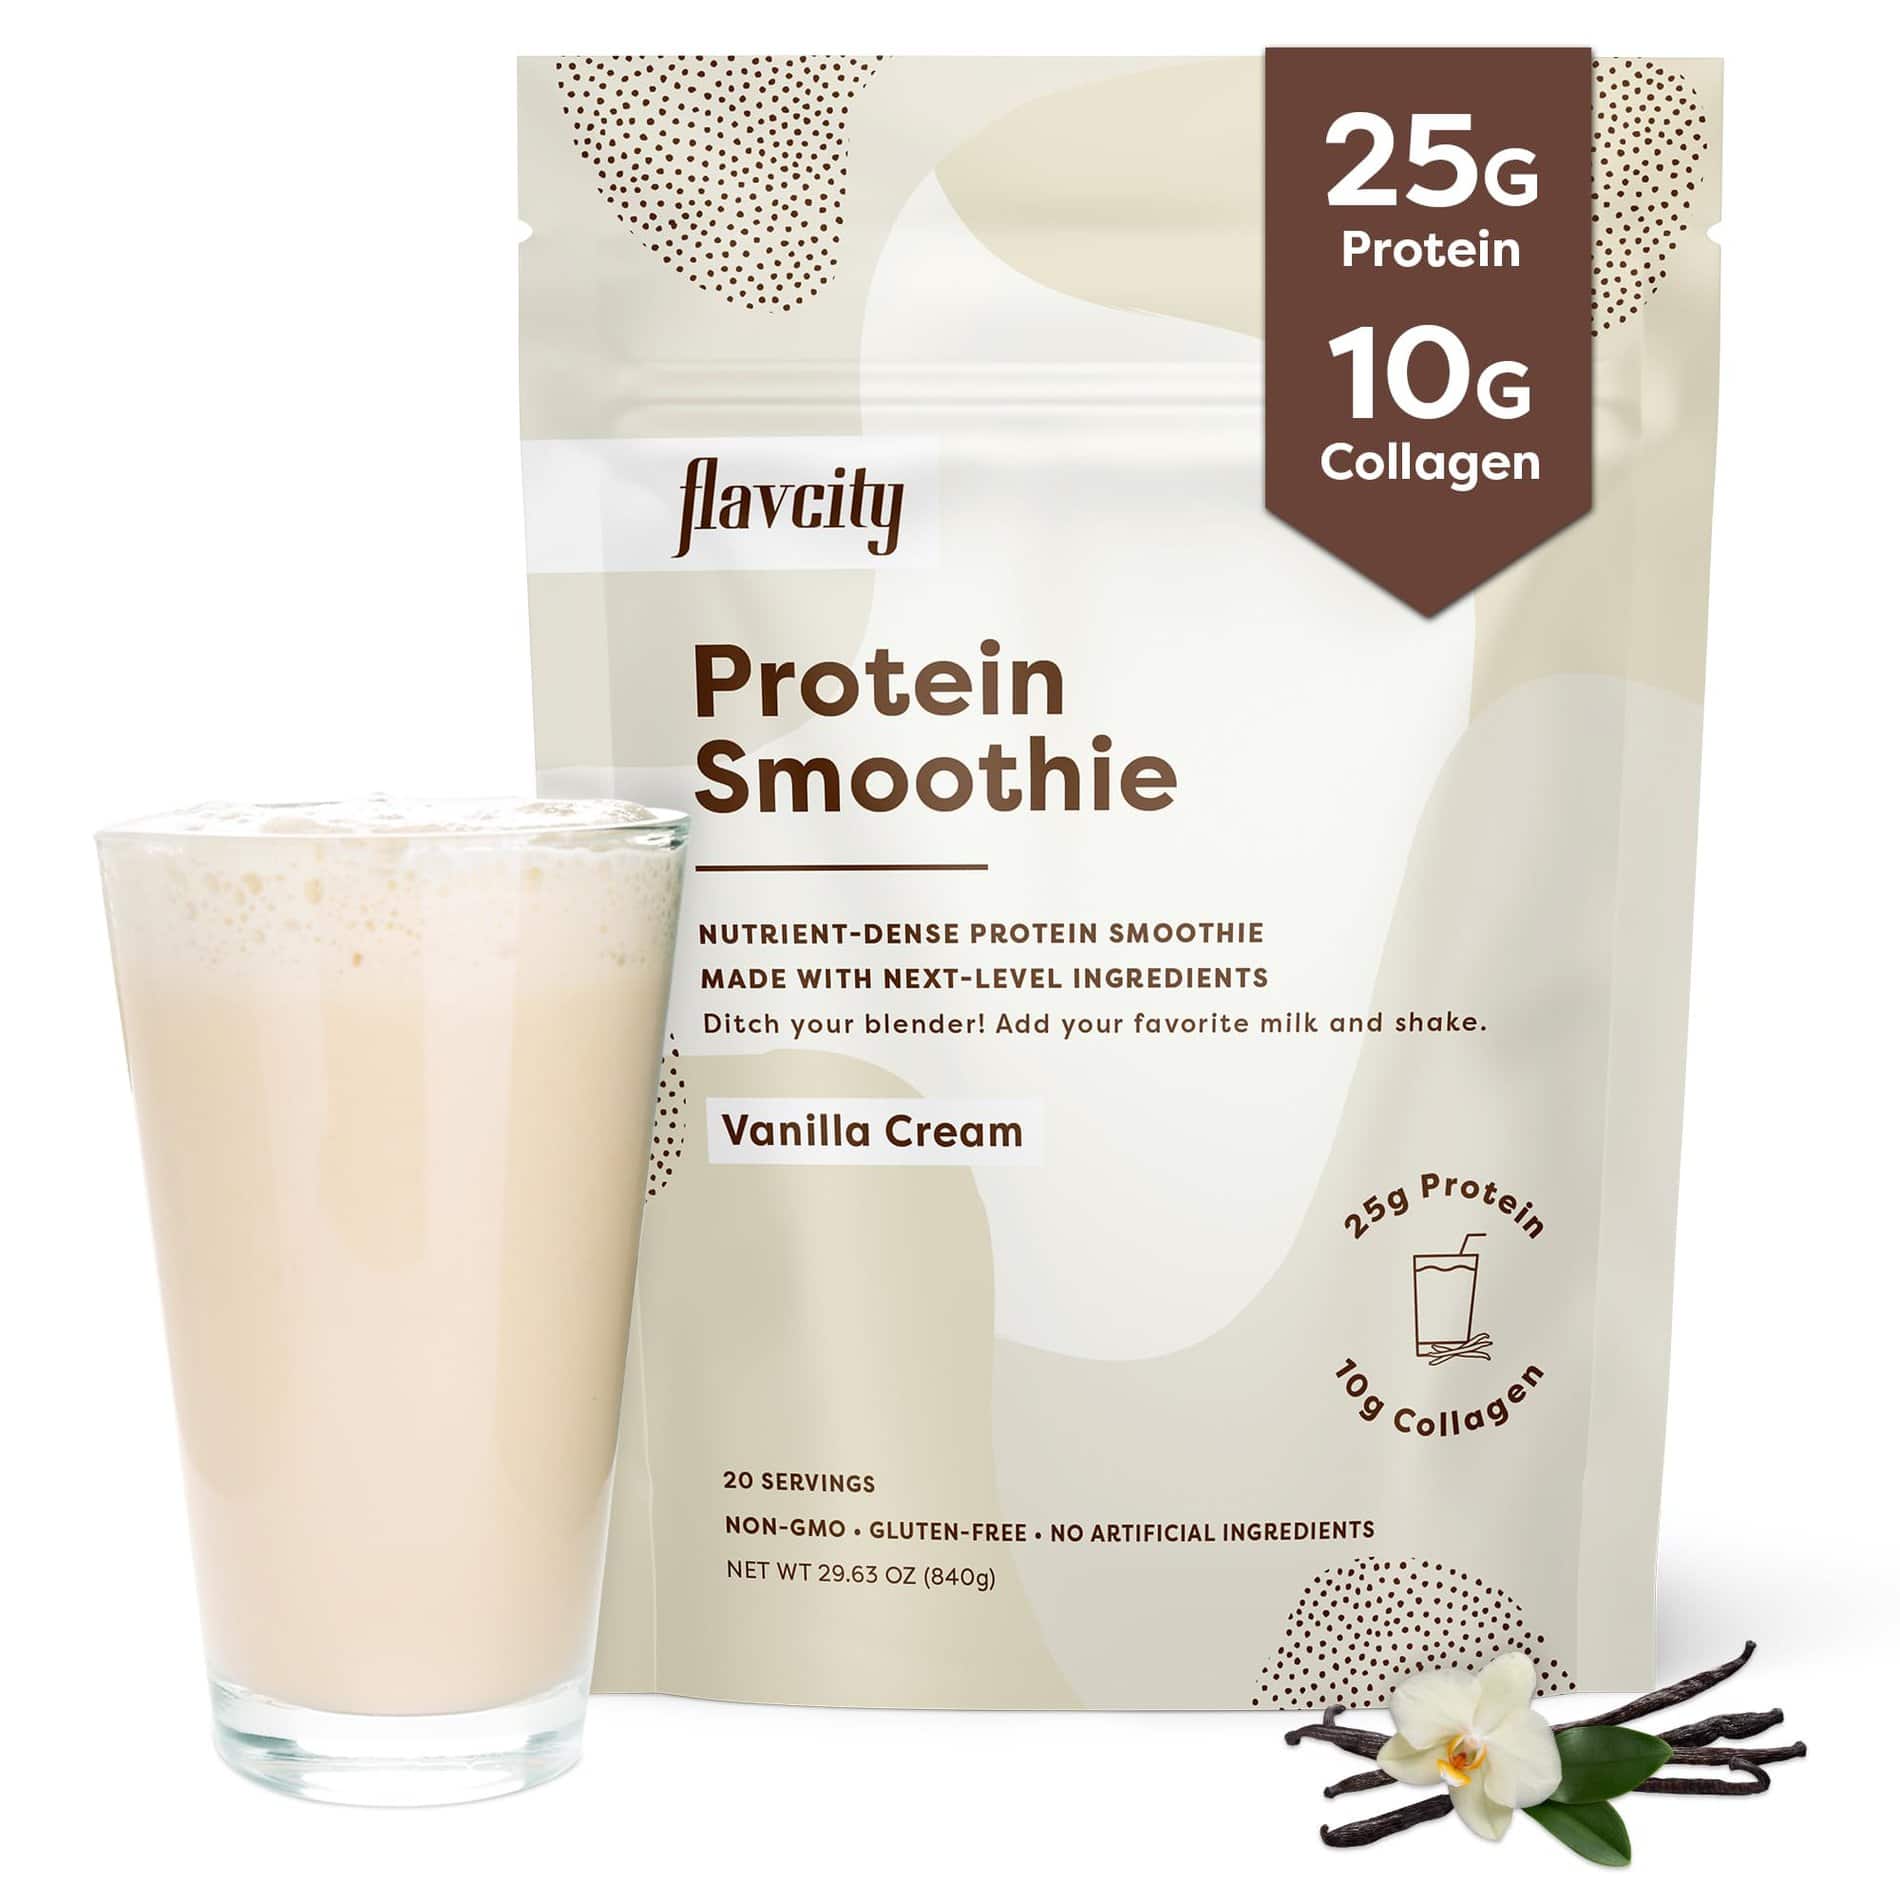 FLAVCITY Protein SmoothieUse code OHSNAP to save 15%!.Click Here →